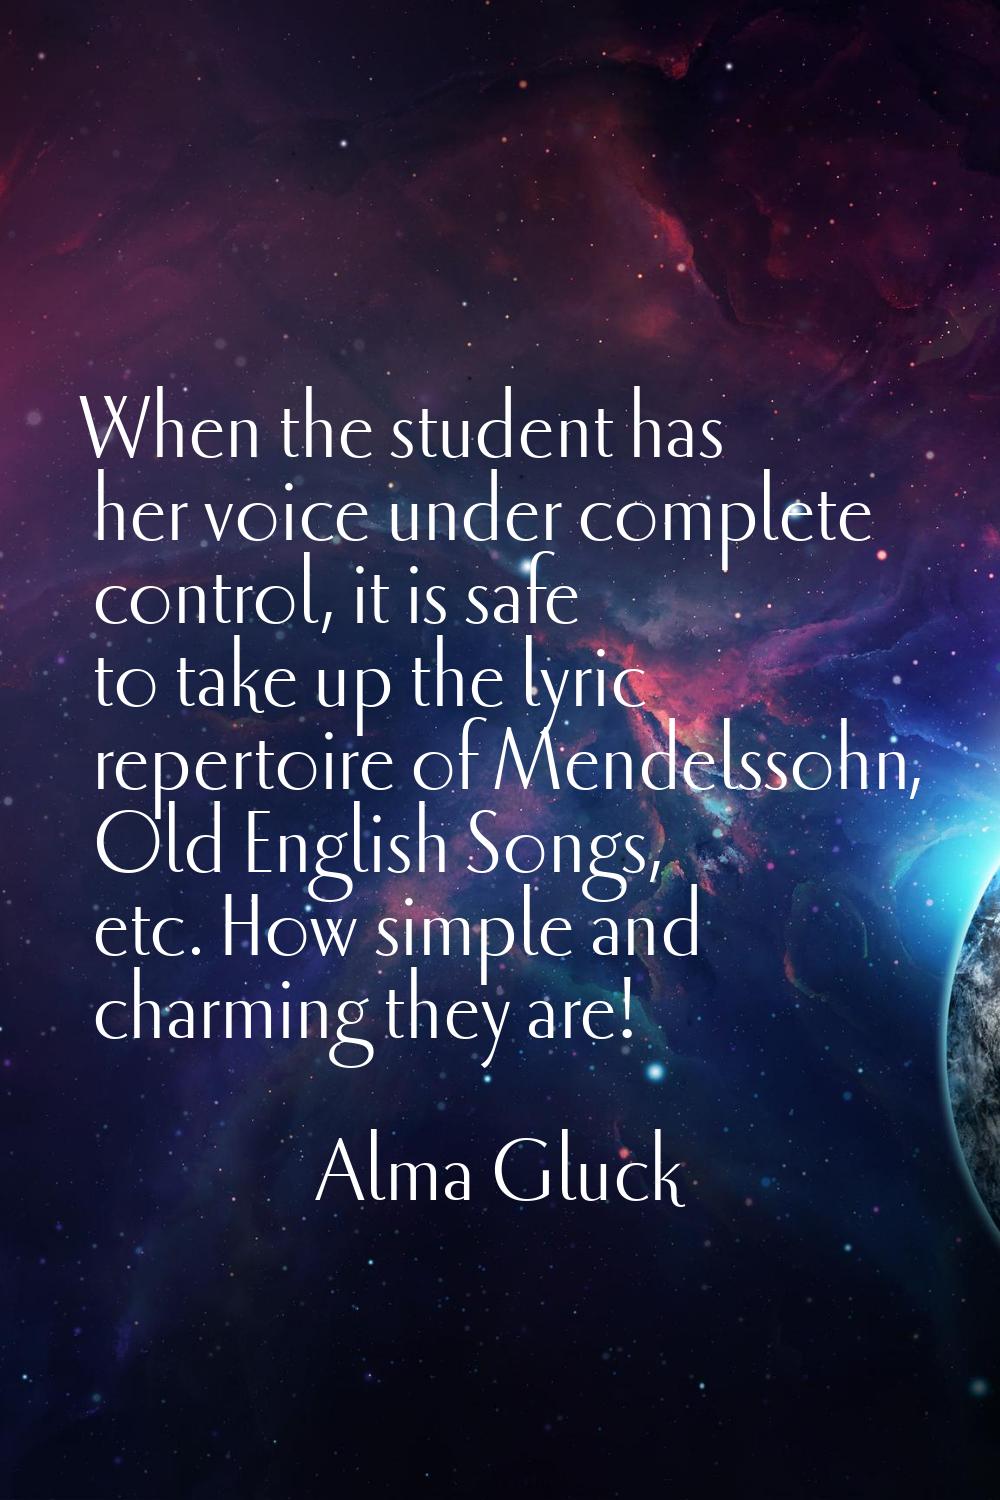 When the student has her voice under complete control, it is safe to take up the lyric repertoire o